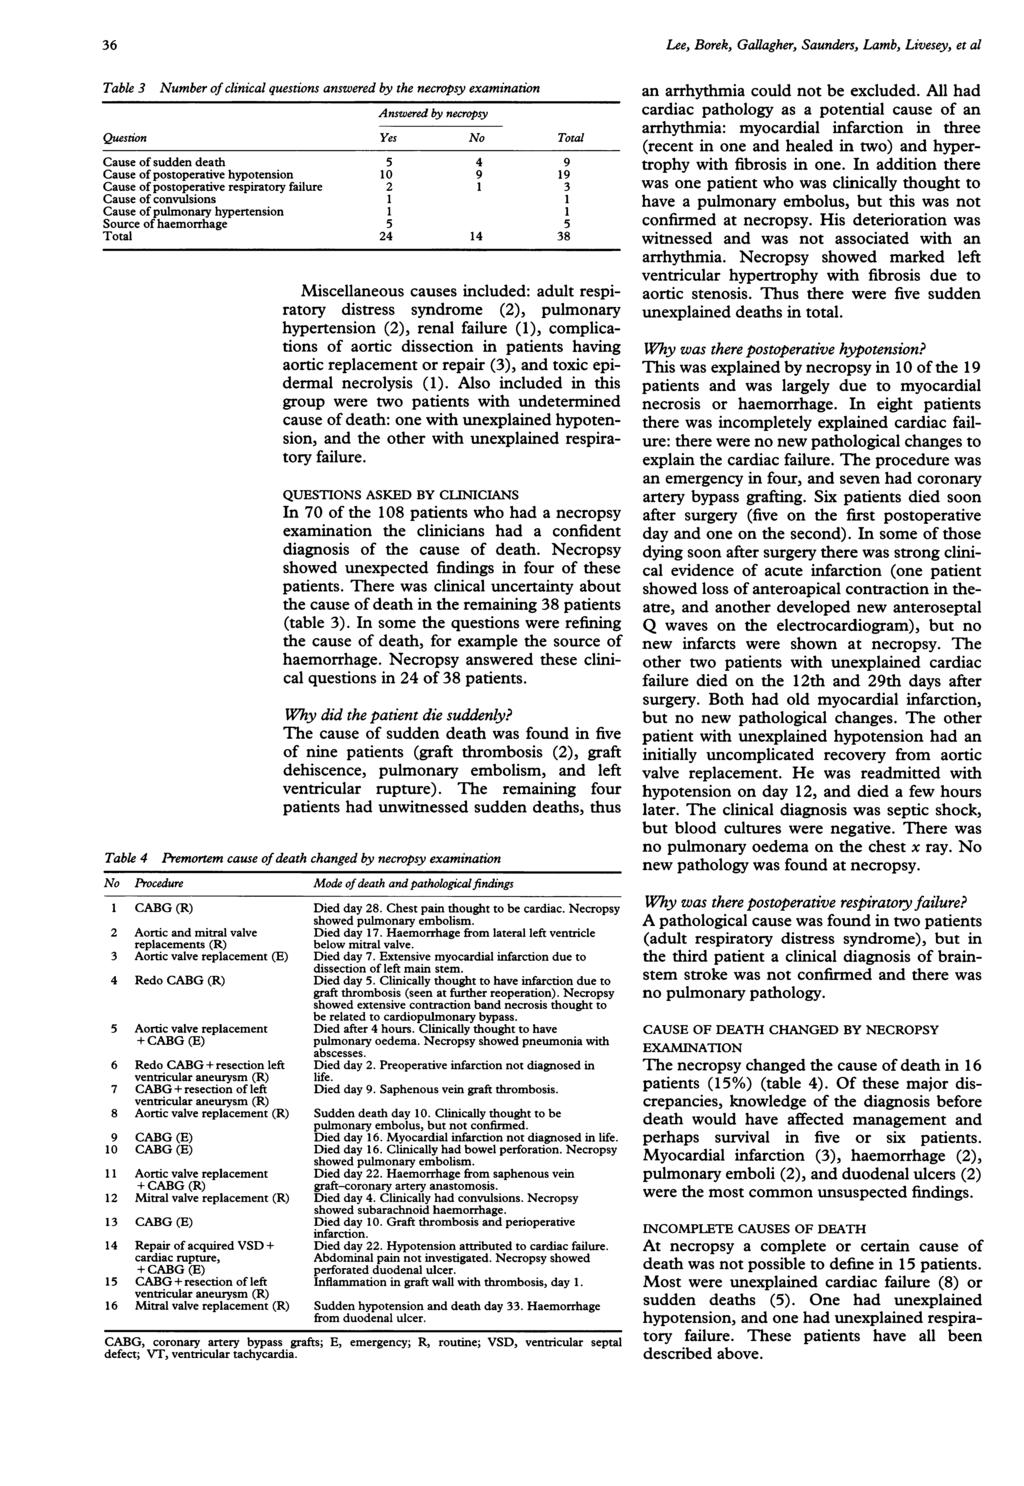 36 Table 3 Number of clinical questions answered by the necropsy examination Answered by necropsy Question Yes No Total Cause of sudden death 5 4 9 Cause of postoperative hypotension 10 9 19 Cause of